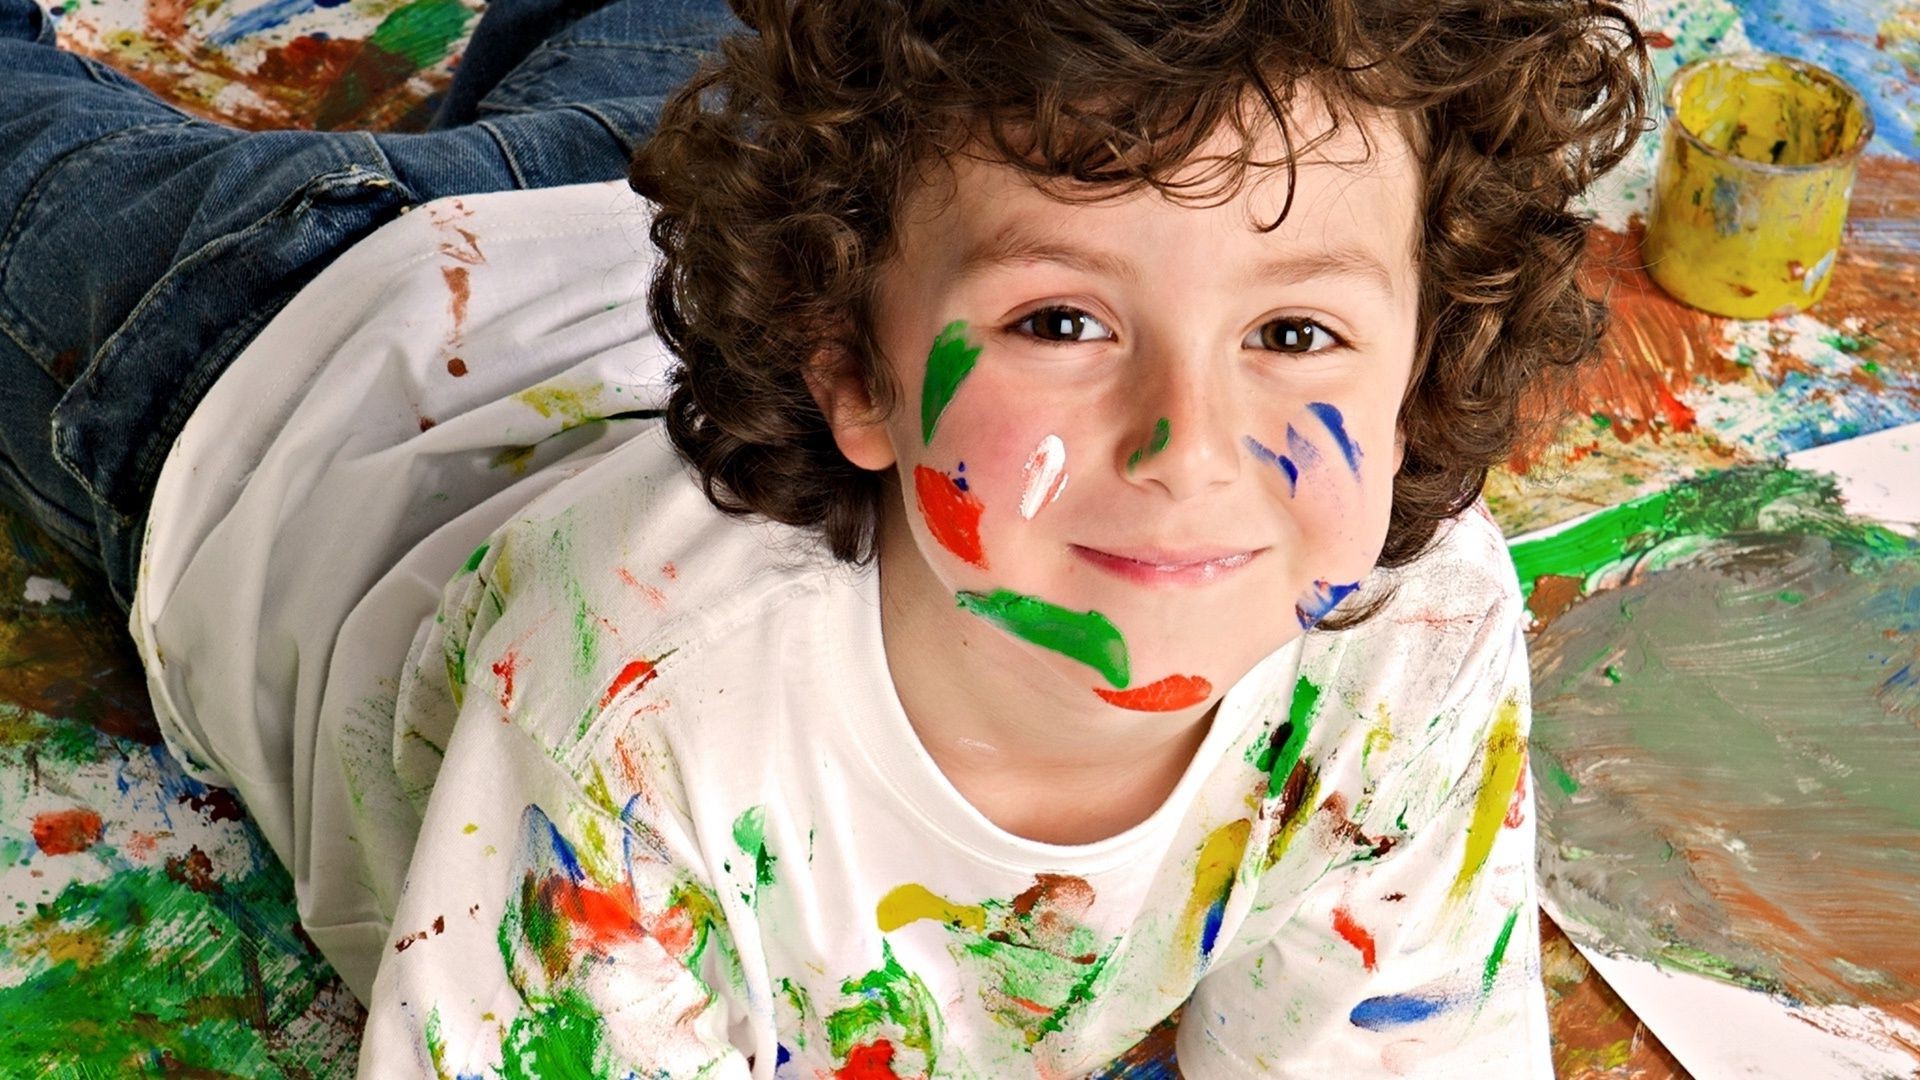 children child fun creativity messy painting cute painter boy portrait little one girl happiness facial expression